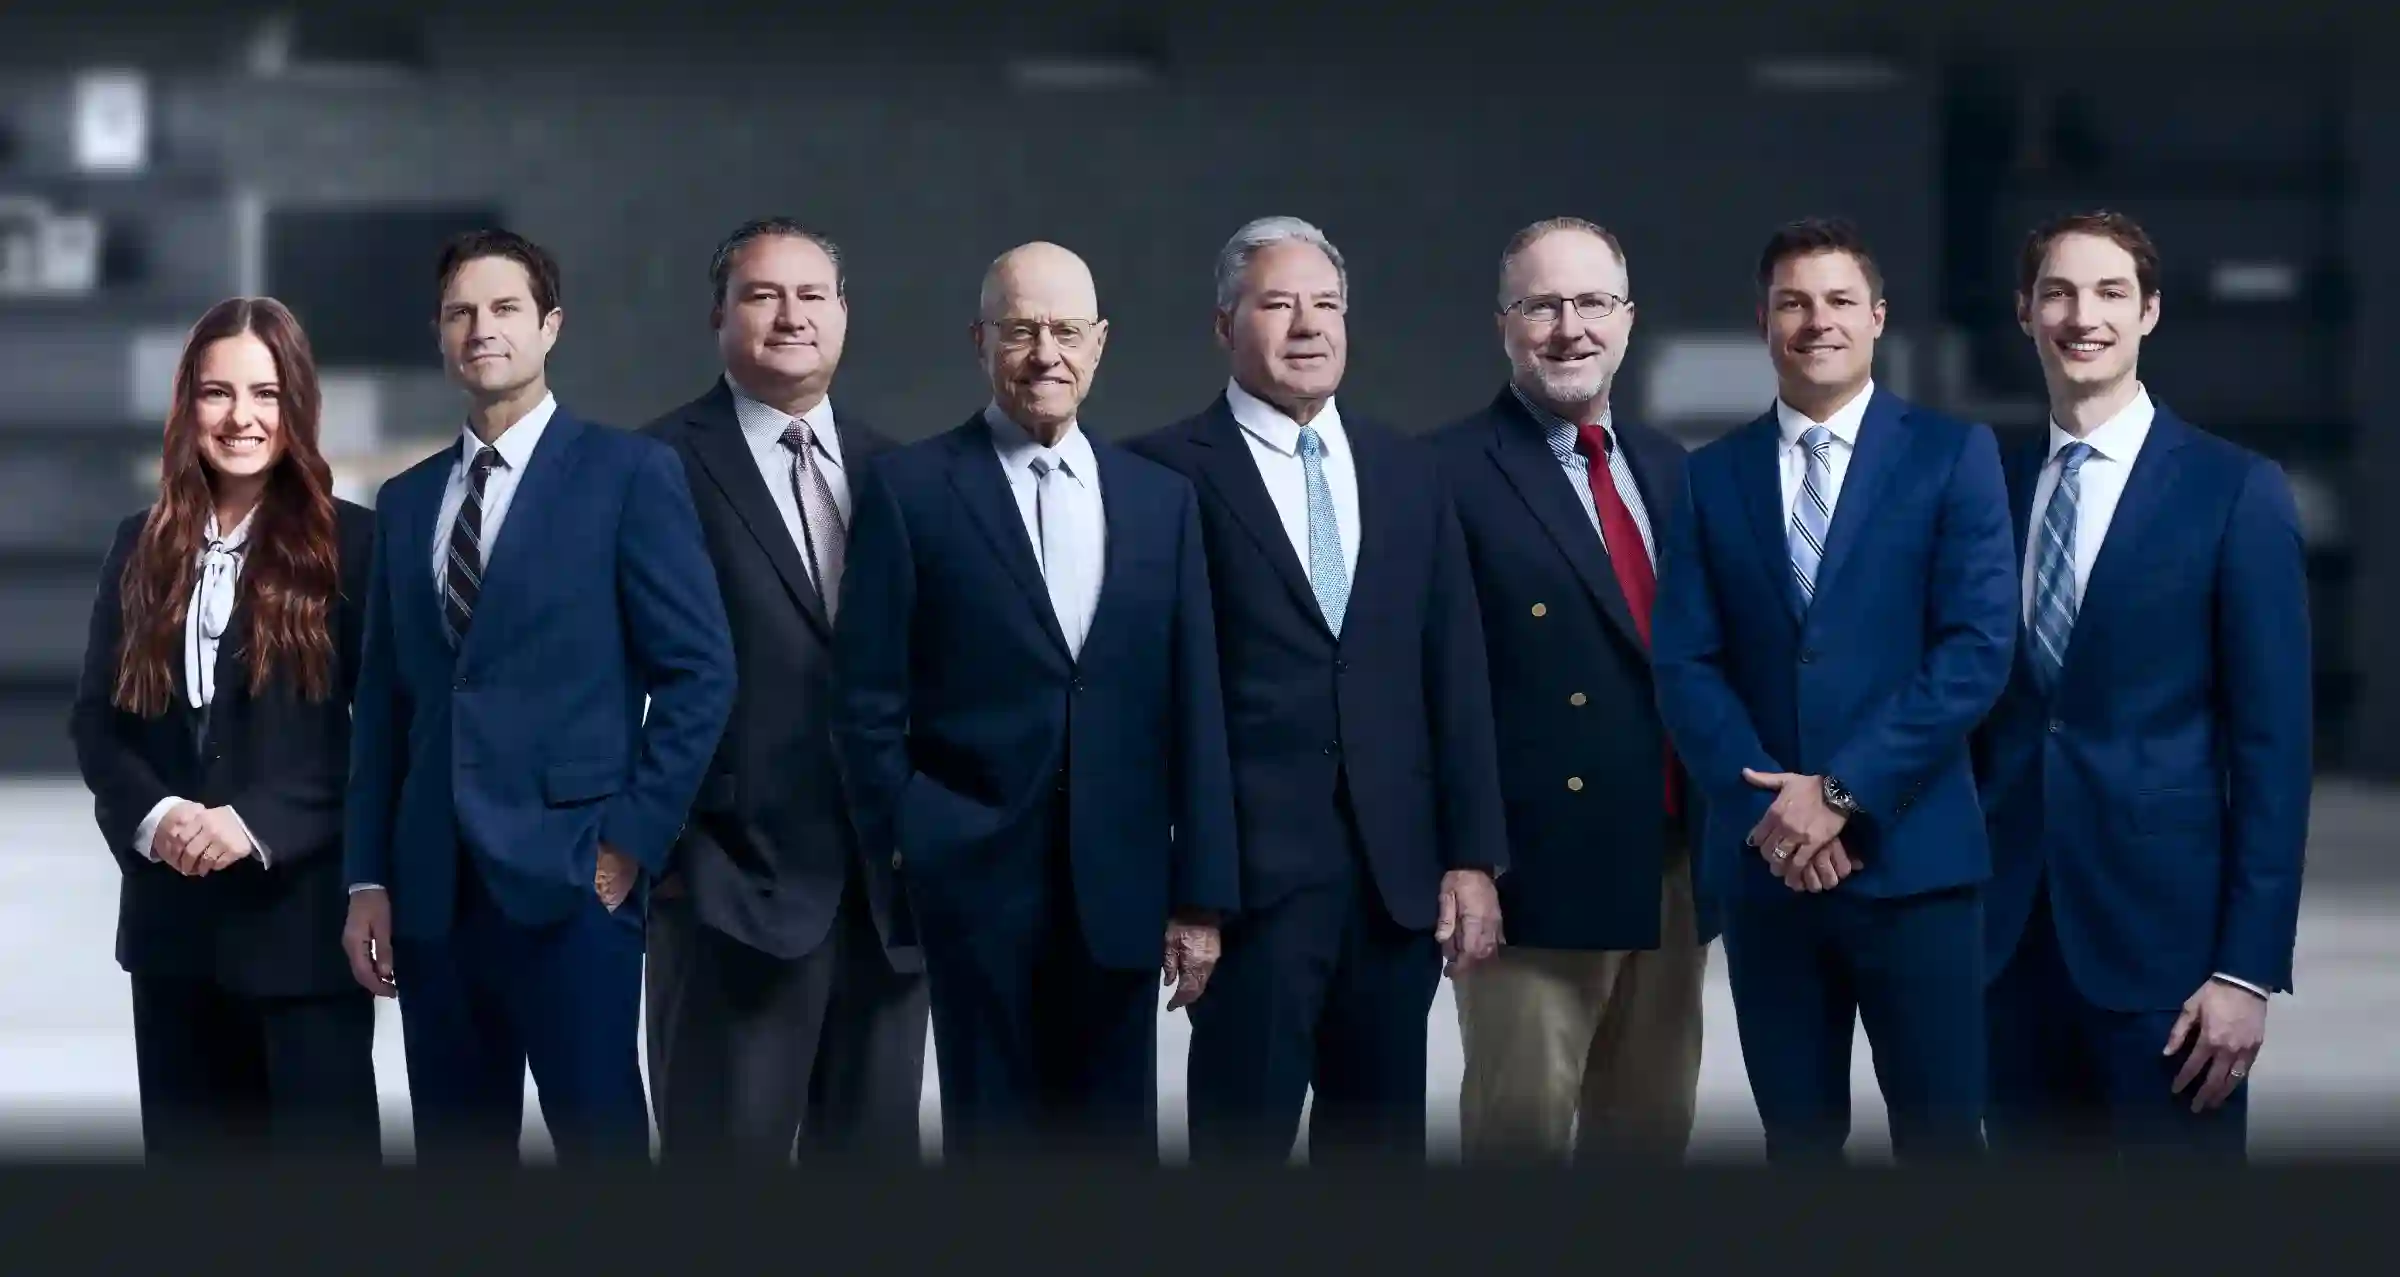 A group of the eight professional lawyers in business attire, representing the Strong Law P.C. legal team.